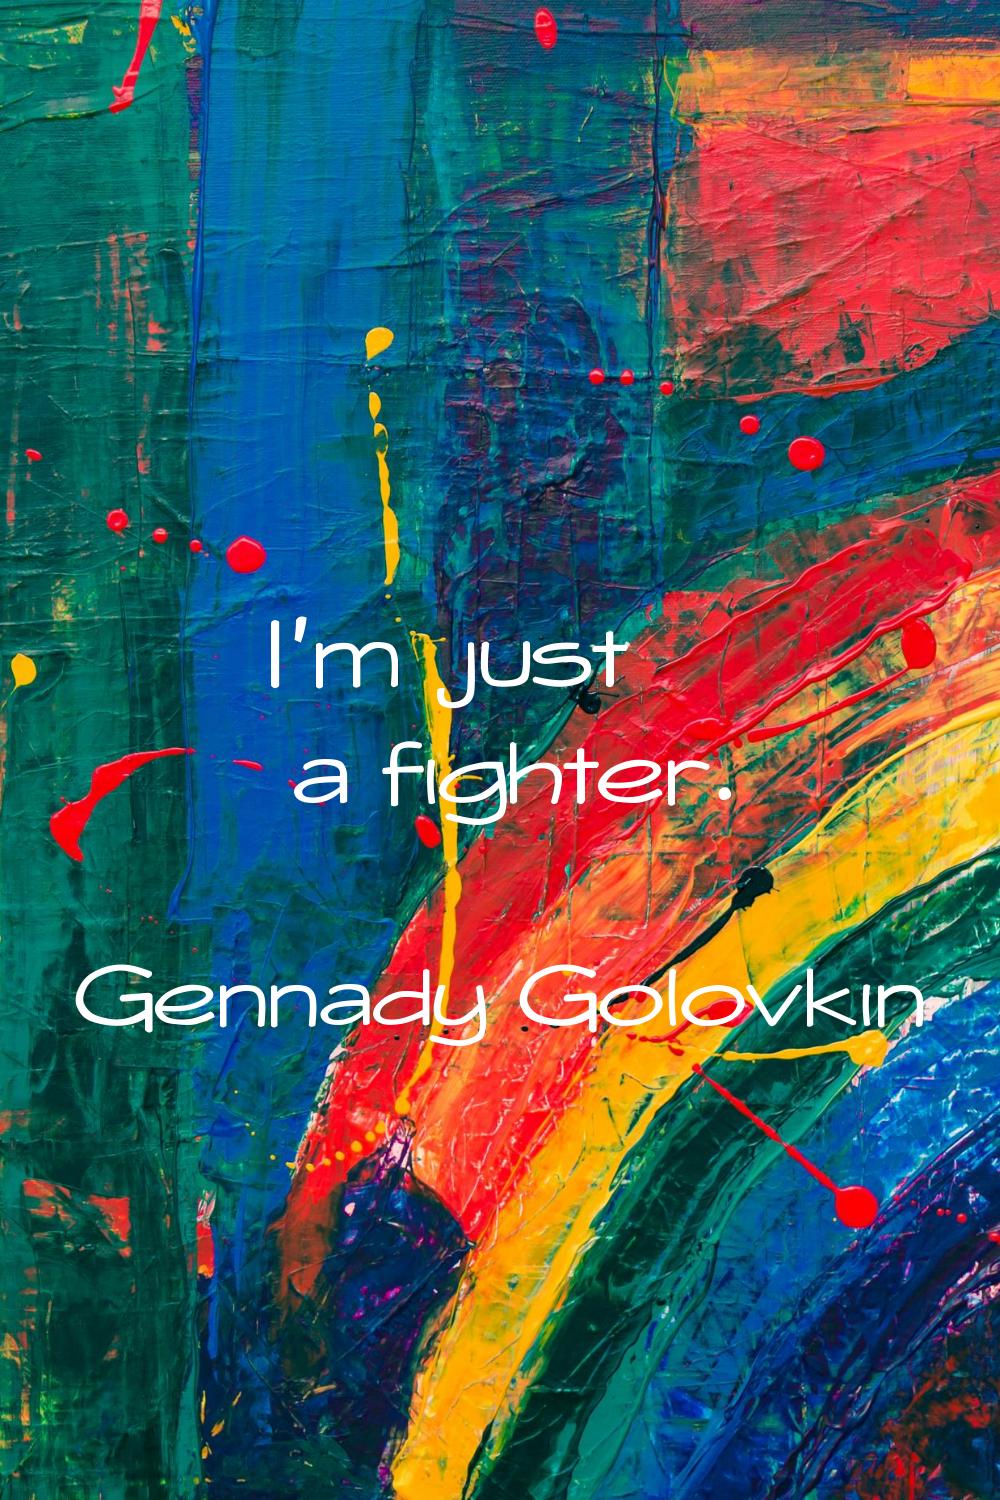 I'm just a fighter.